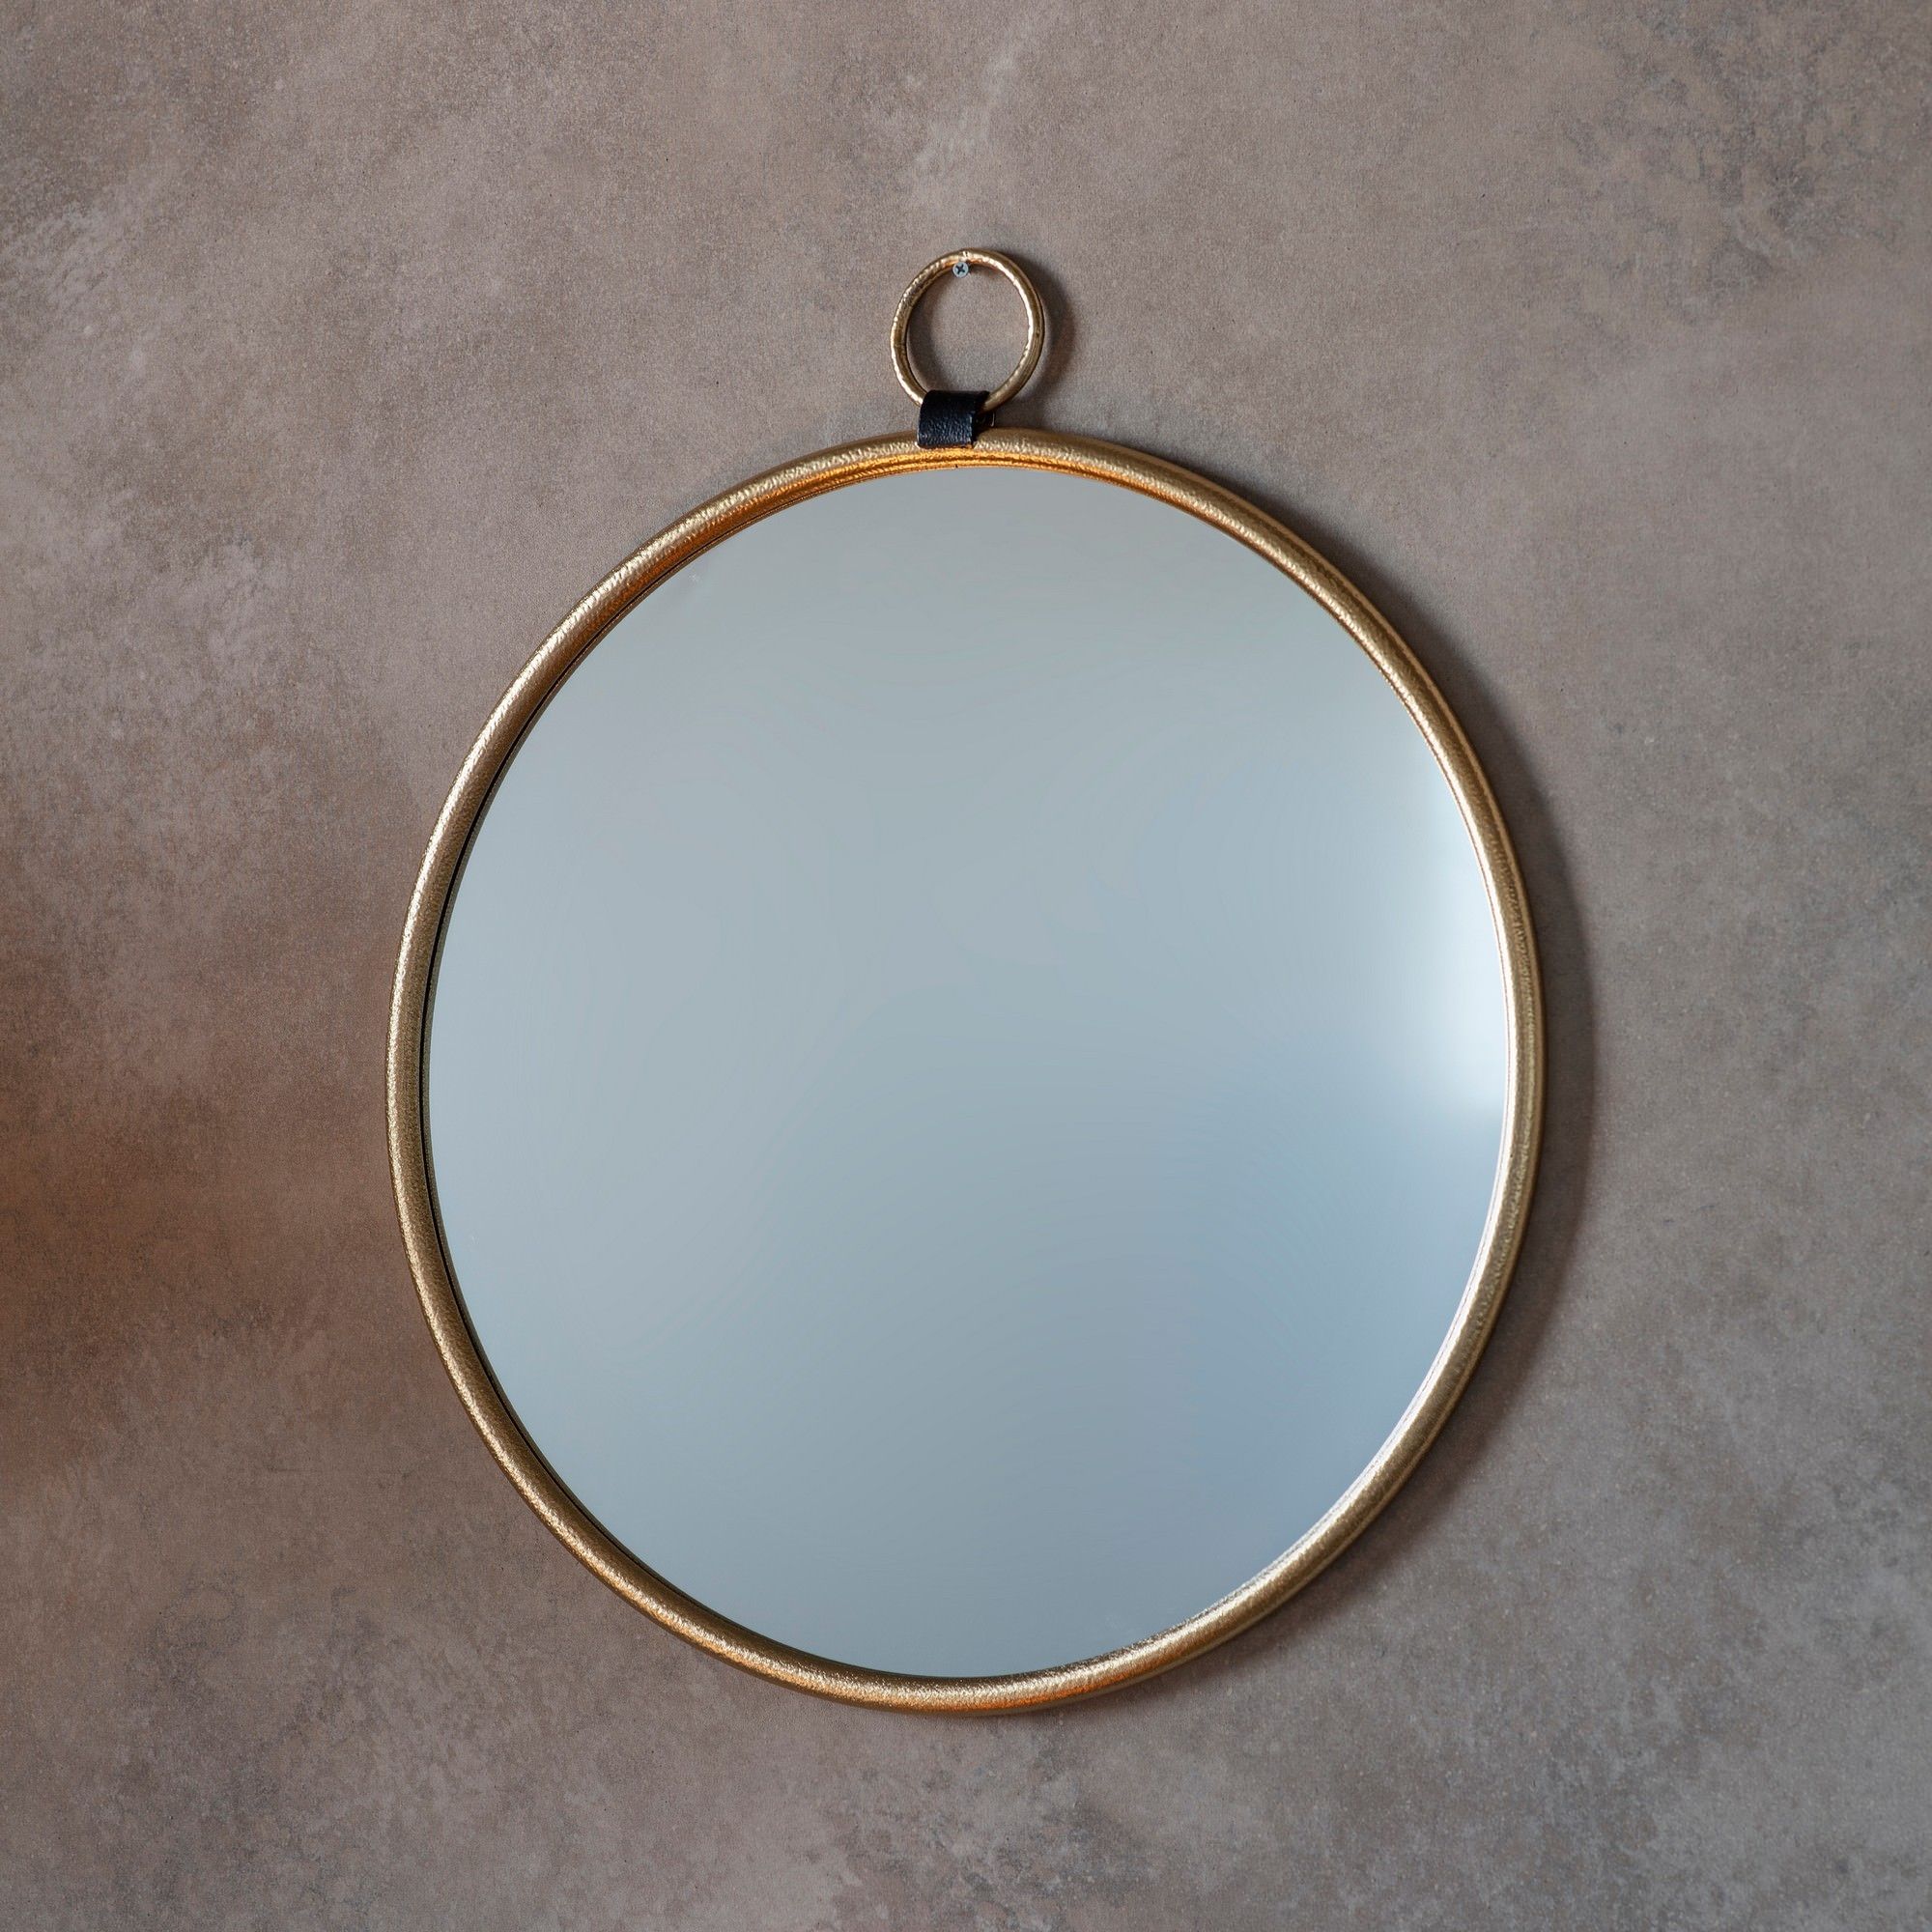 Bainbridge Iron Frame Round Wall Mirror, 70Cm, Gold Pertaining To Round Metal Luxe Gold Wall Mirrors (View 1 of 15)